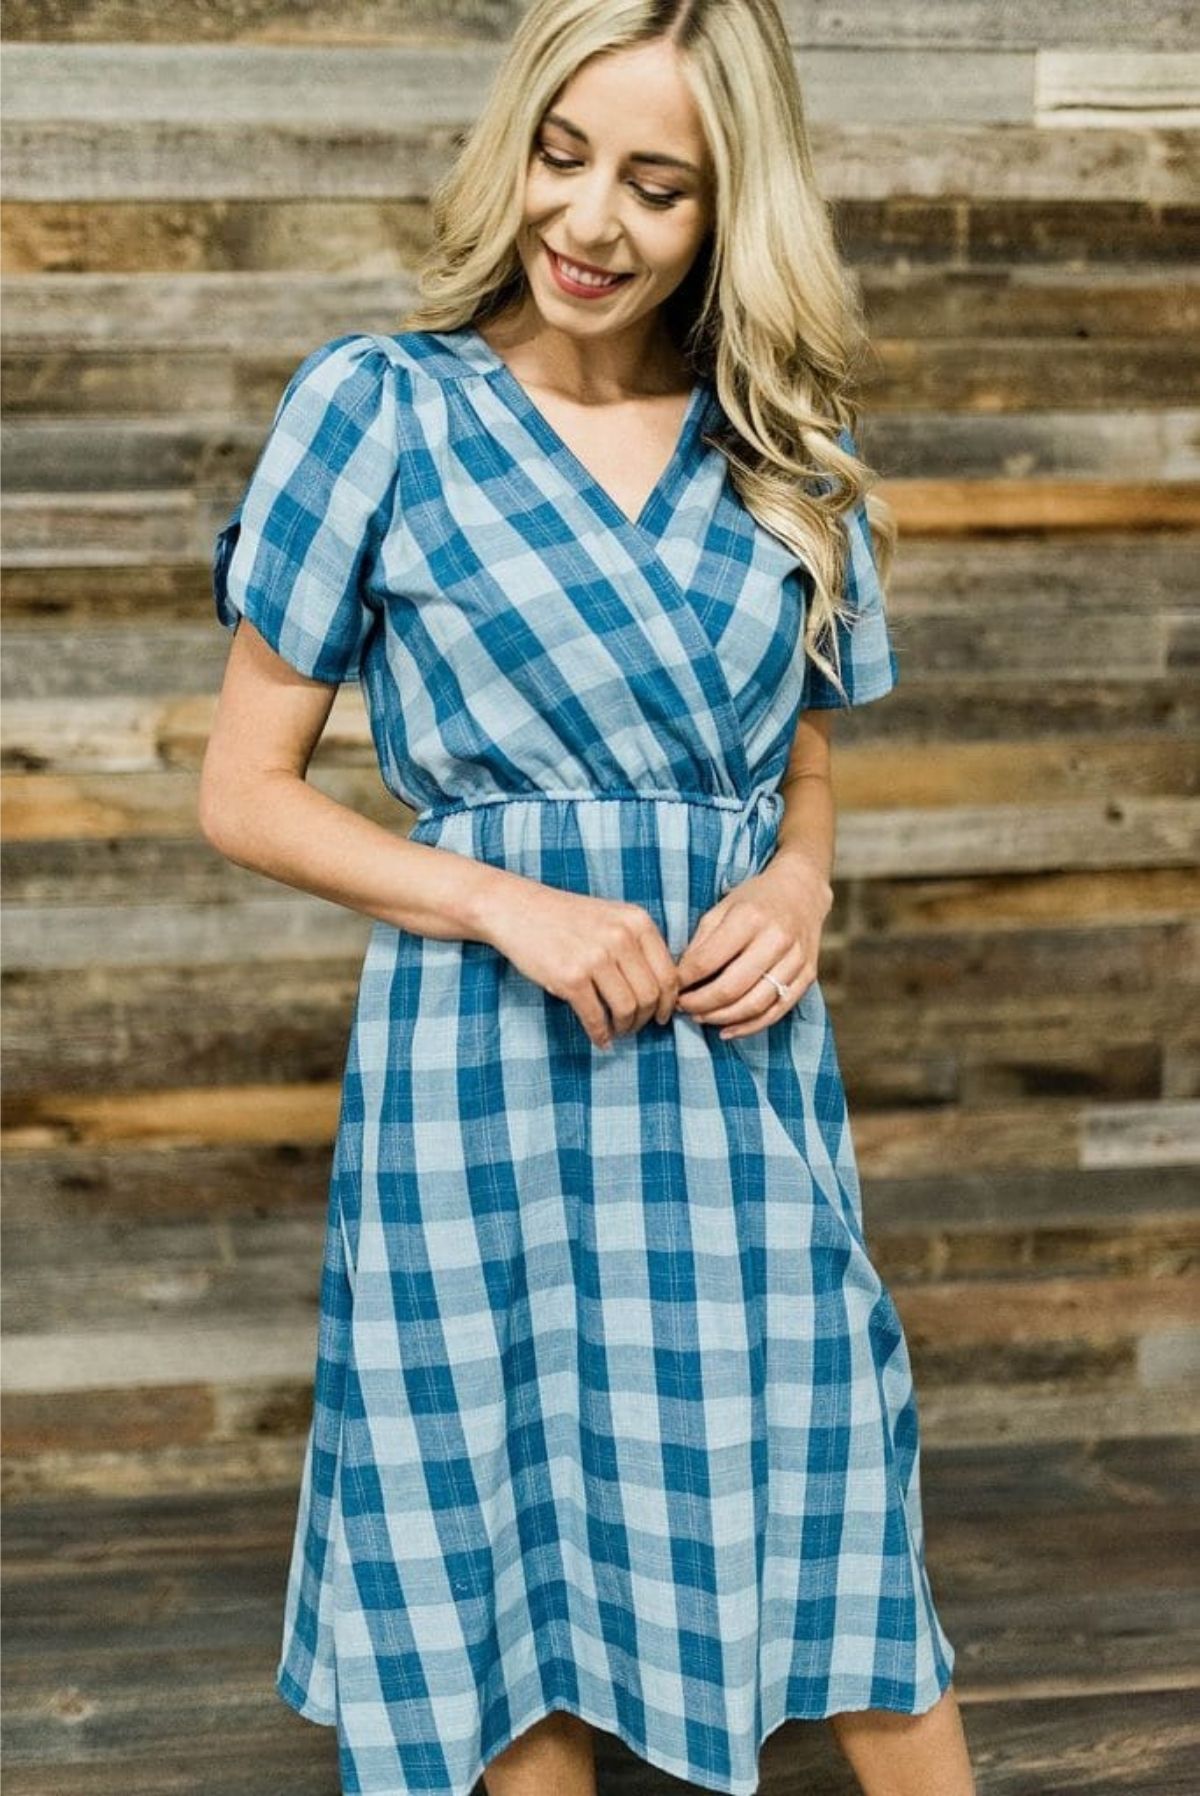 Example of a wrap dress